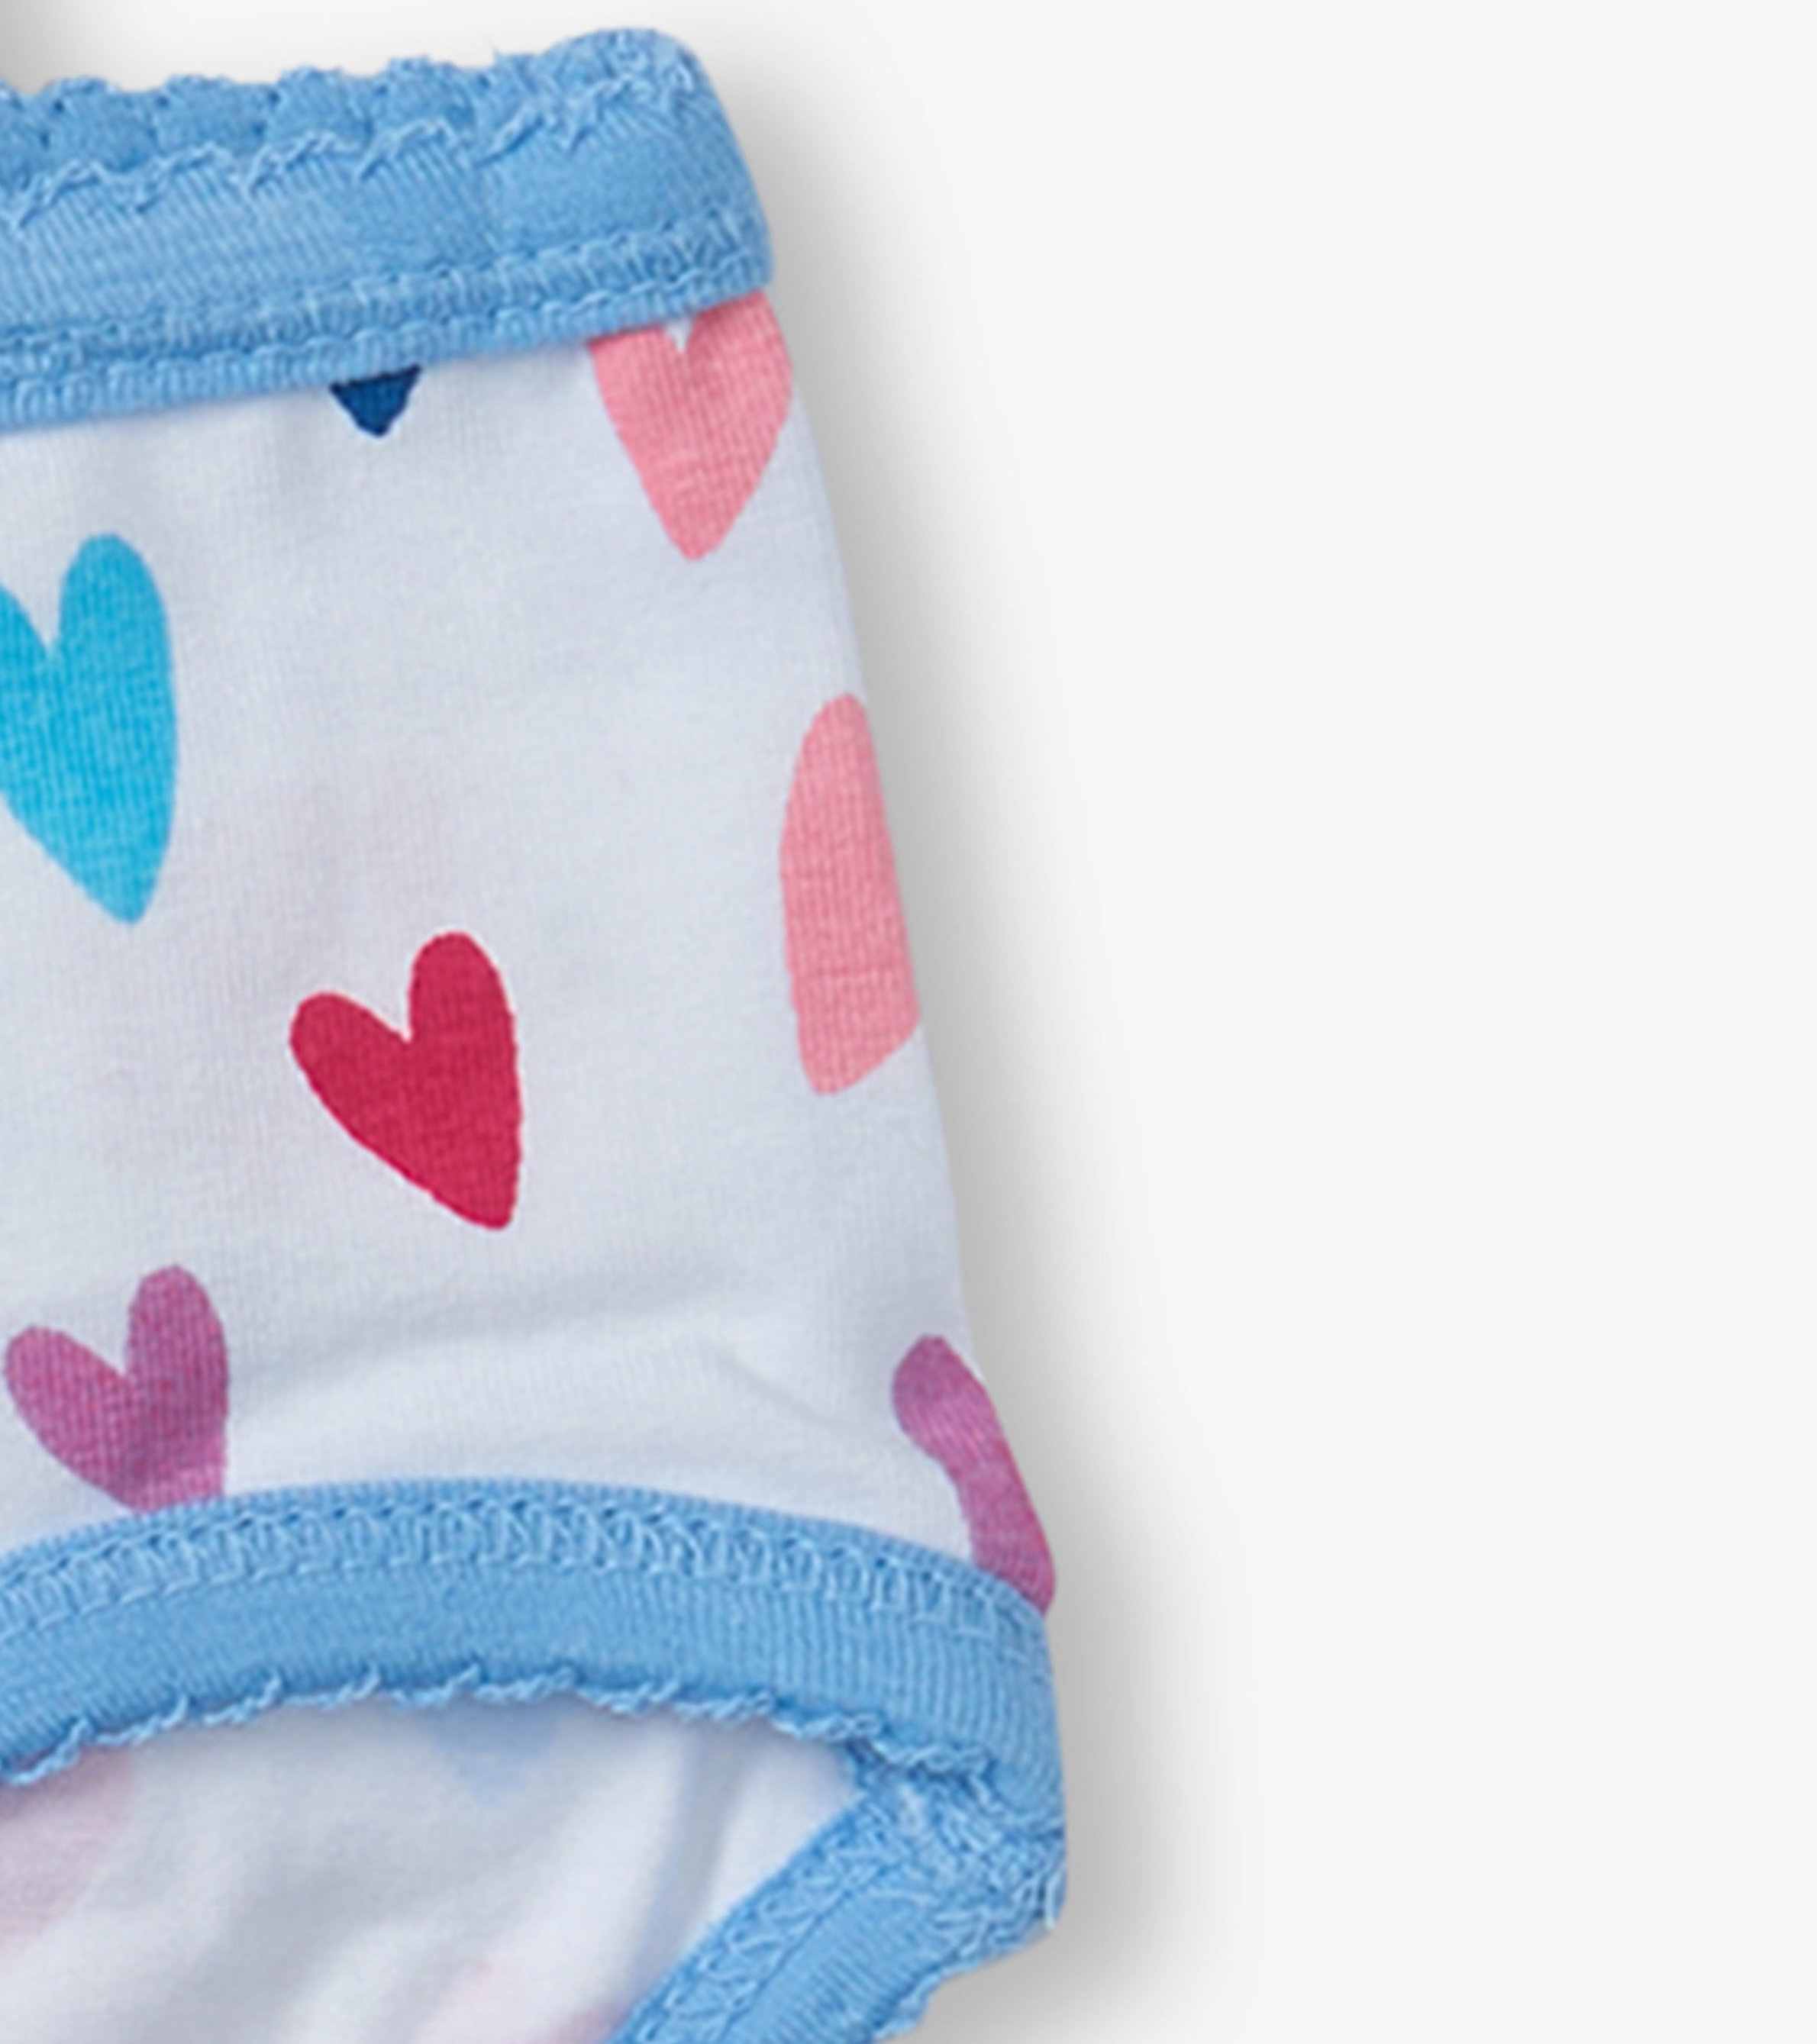 Maternity Underwear – Close to the Heart